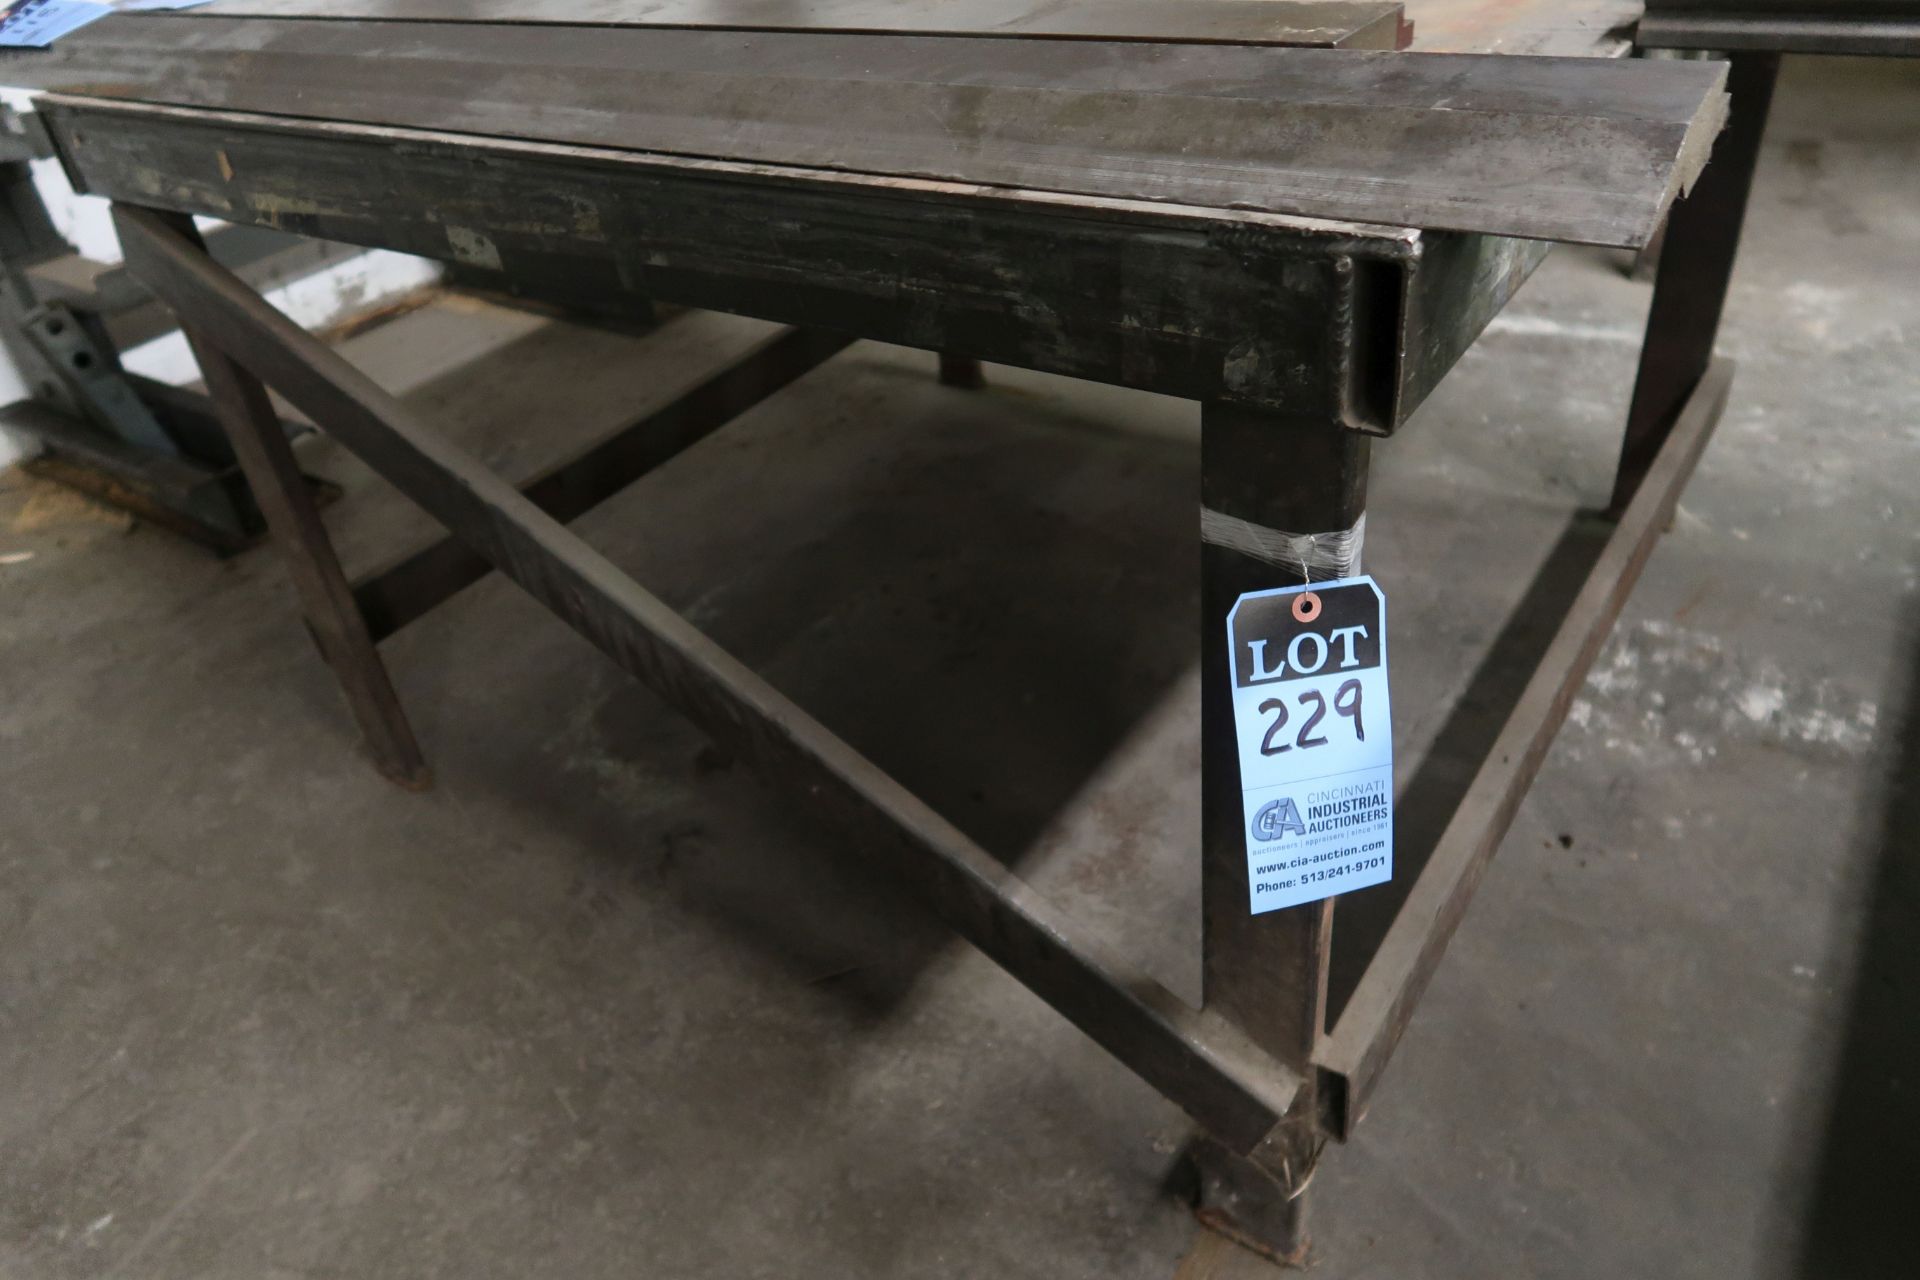 48" X 48" X 31" HIGH SHOP BUILT WELDED STEEL TABLE **NO CONTENTS** **DELAY REMOVAL - PICK UP 9-23-